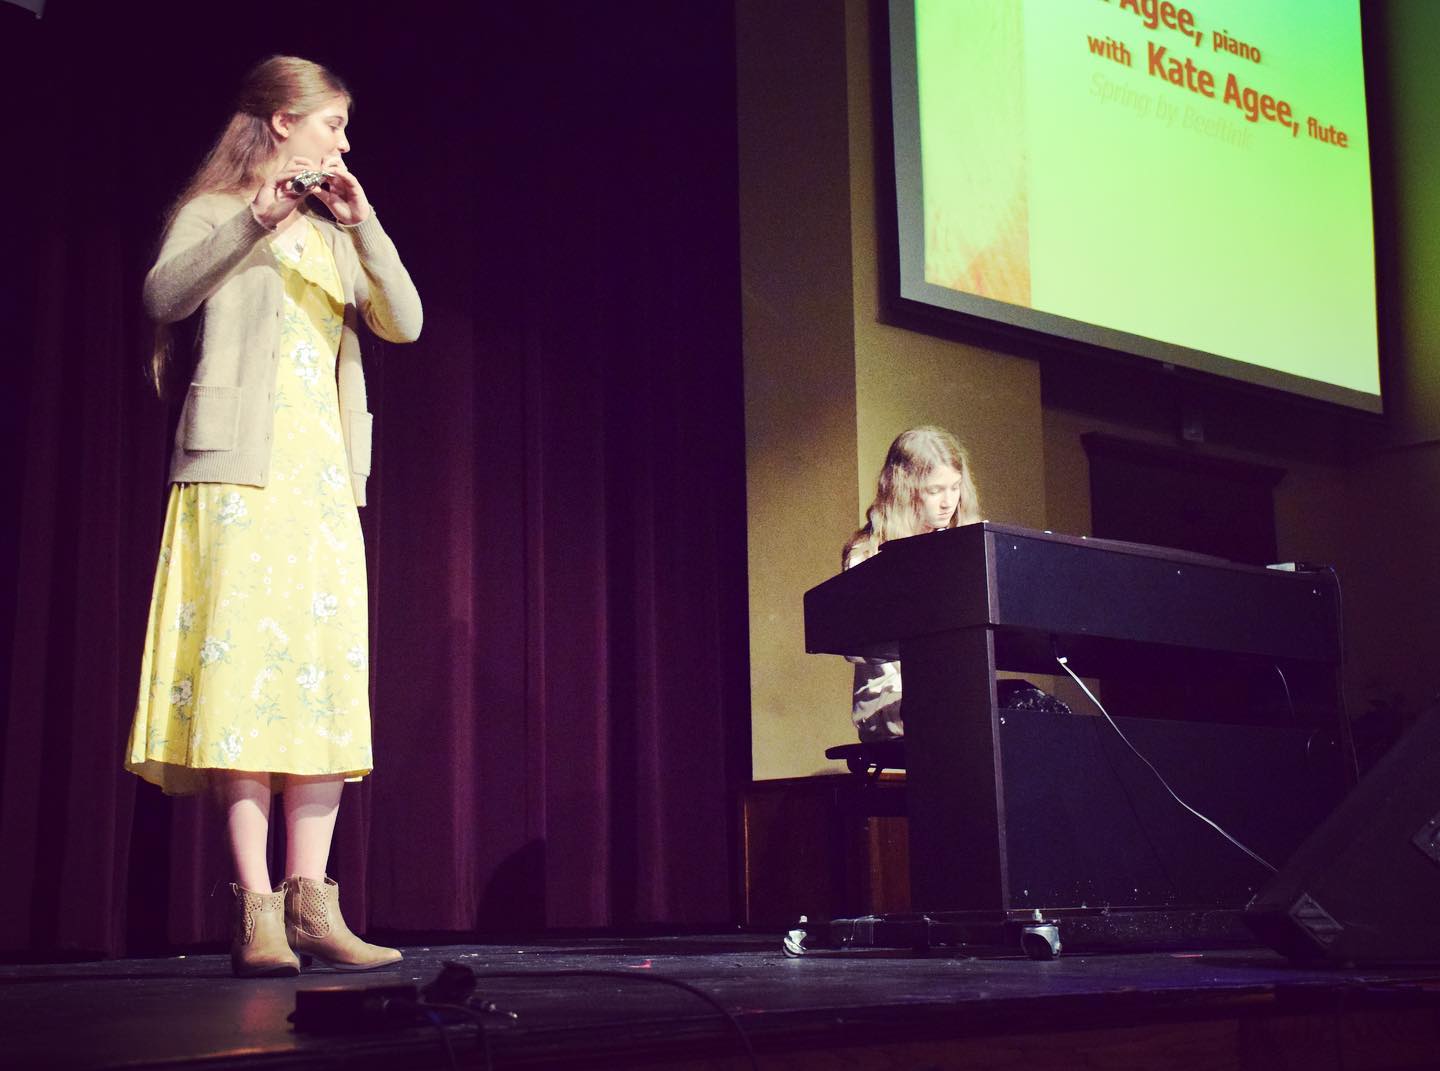 Last night at the @lipscombacademy Middle-School Talent show, we got to see Sara in three different numbers, including a wonderful piano performance of “Spring” by Herman Beeftink while accompanied by @kateagee on flute. So proud of my talented girls. #family #music